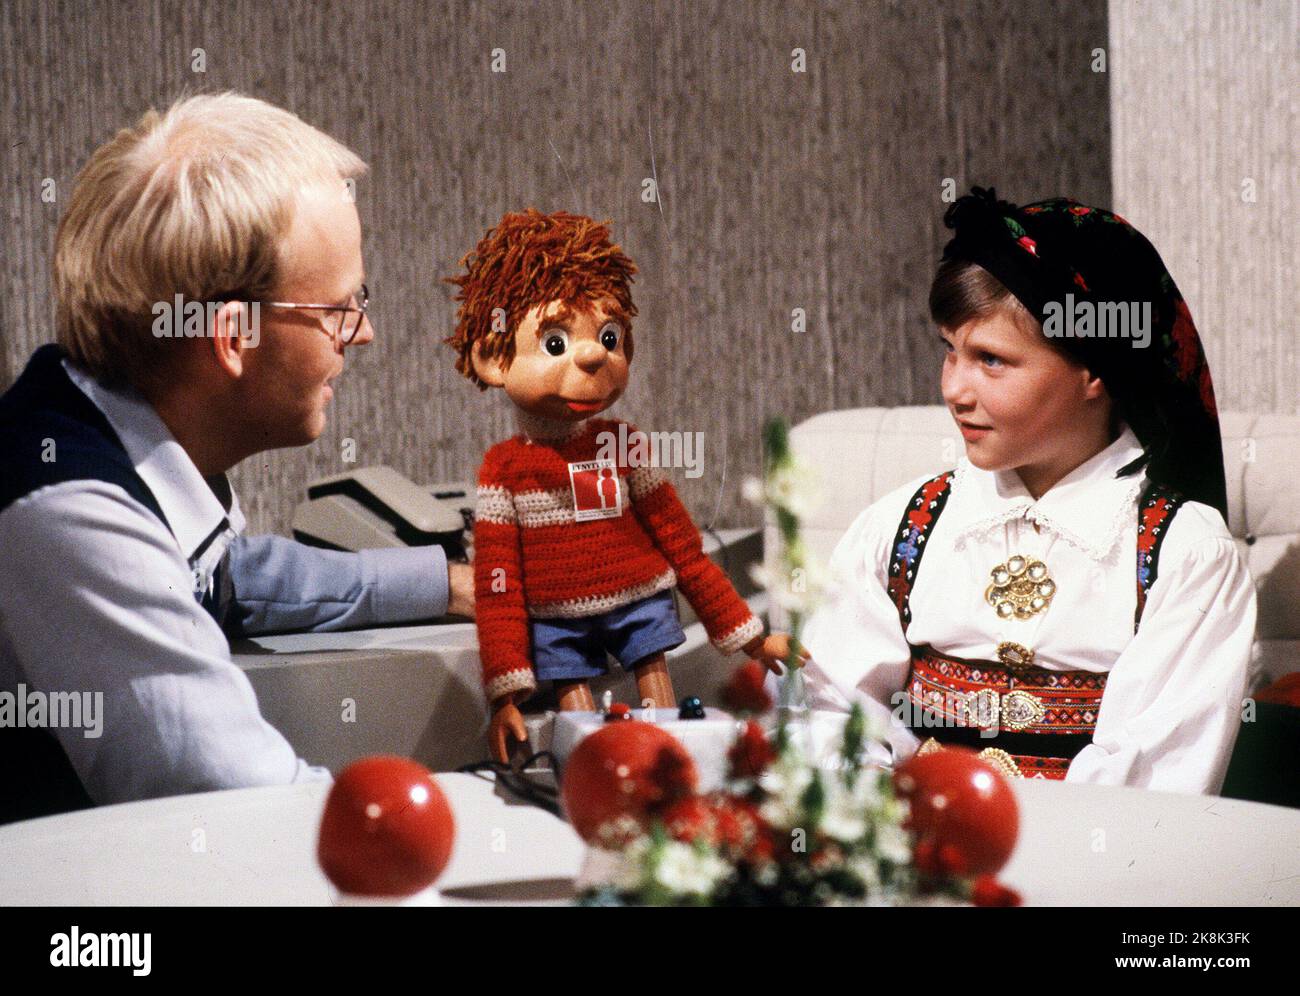 Oslo 19811025: Princess Märtha Louise in the TV studio in connection with the TV action 'A new life'. Together with the princess is the program director Trond-Viggo Torgersen and the children's hour-doll 'Titten Tei'. The princess wearing bunad. Photo: Erik Thorberg / NTB / NTB - - The picture is 15 MB - - - Stock Photo